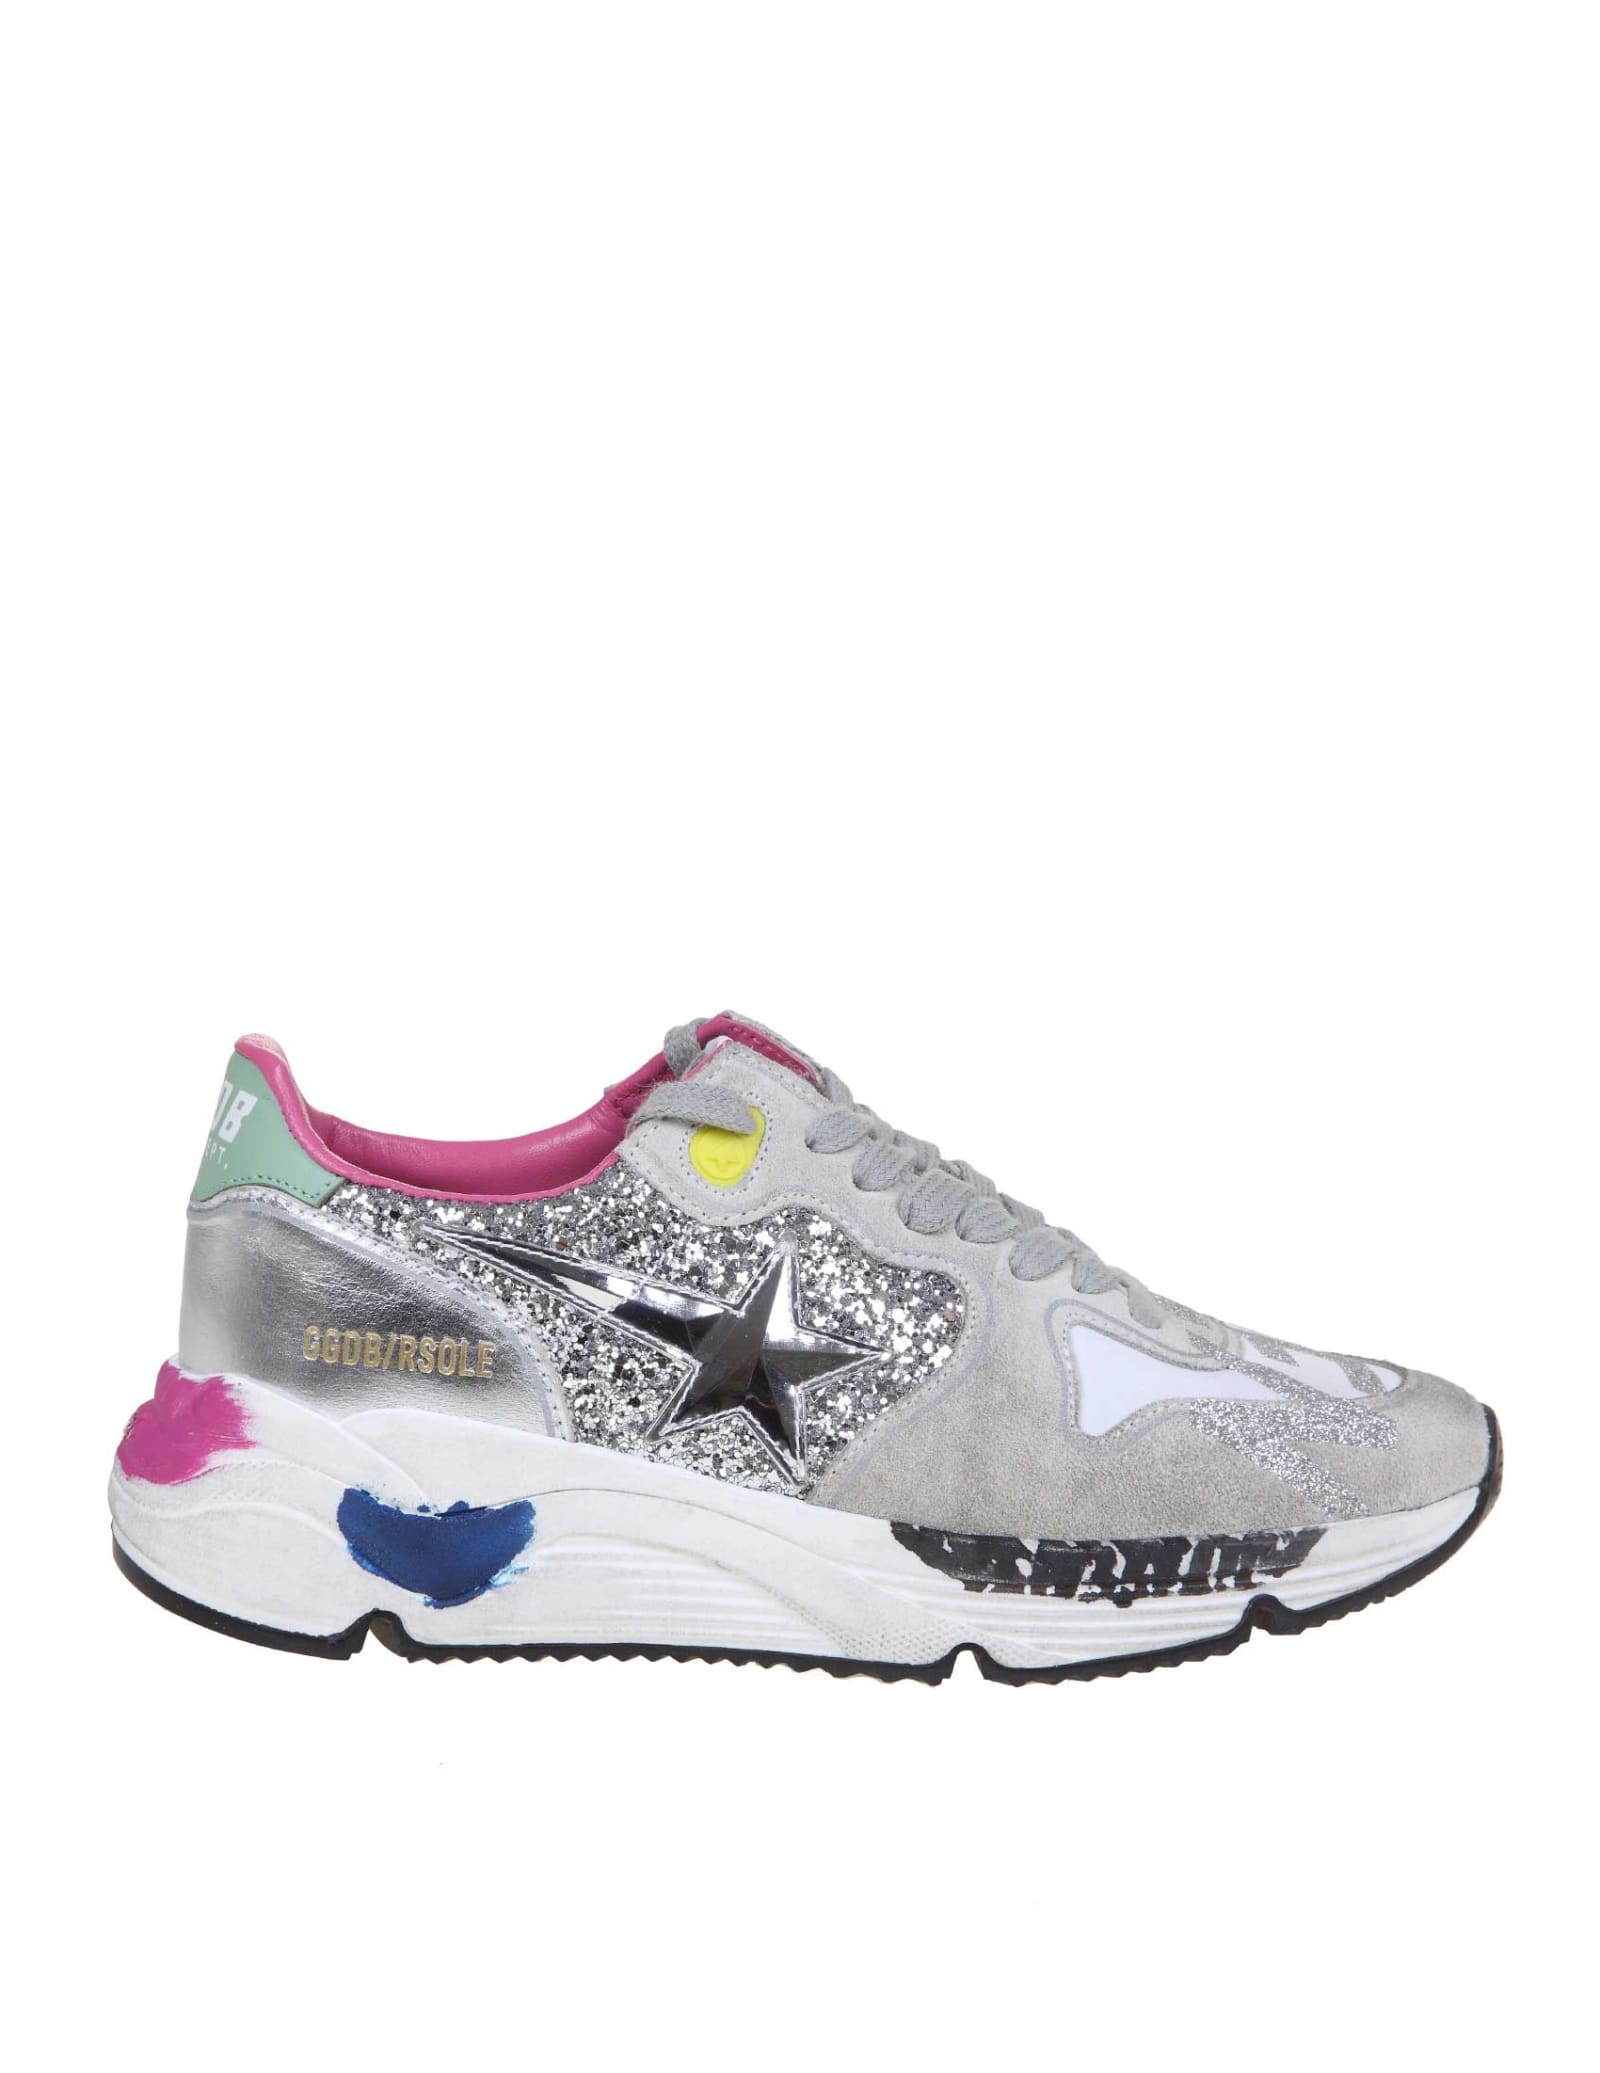 GOLDEN GOOSE RUNNING SUN SNEAKERS IN SUEDE AND GLITTER LEATHER,11245075